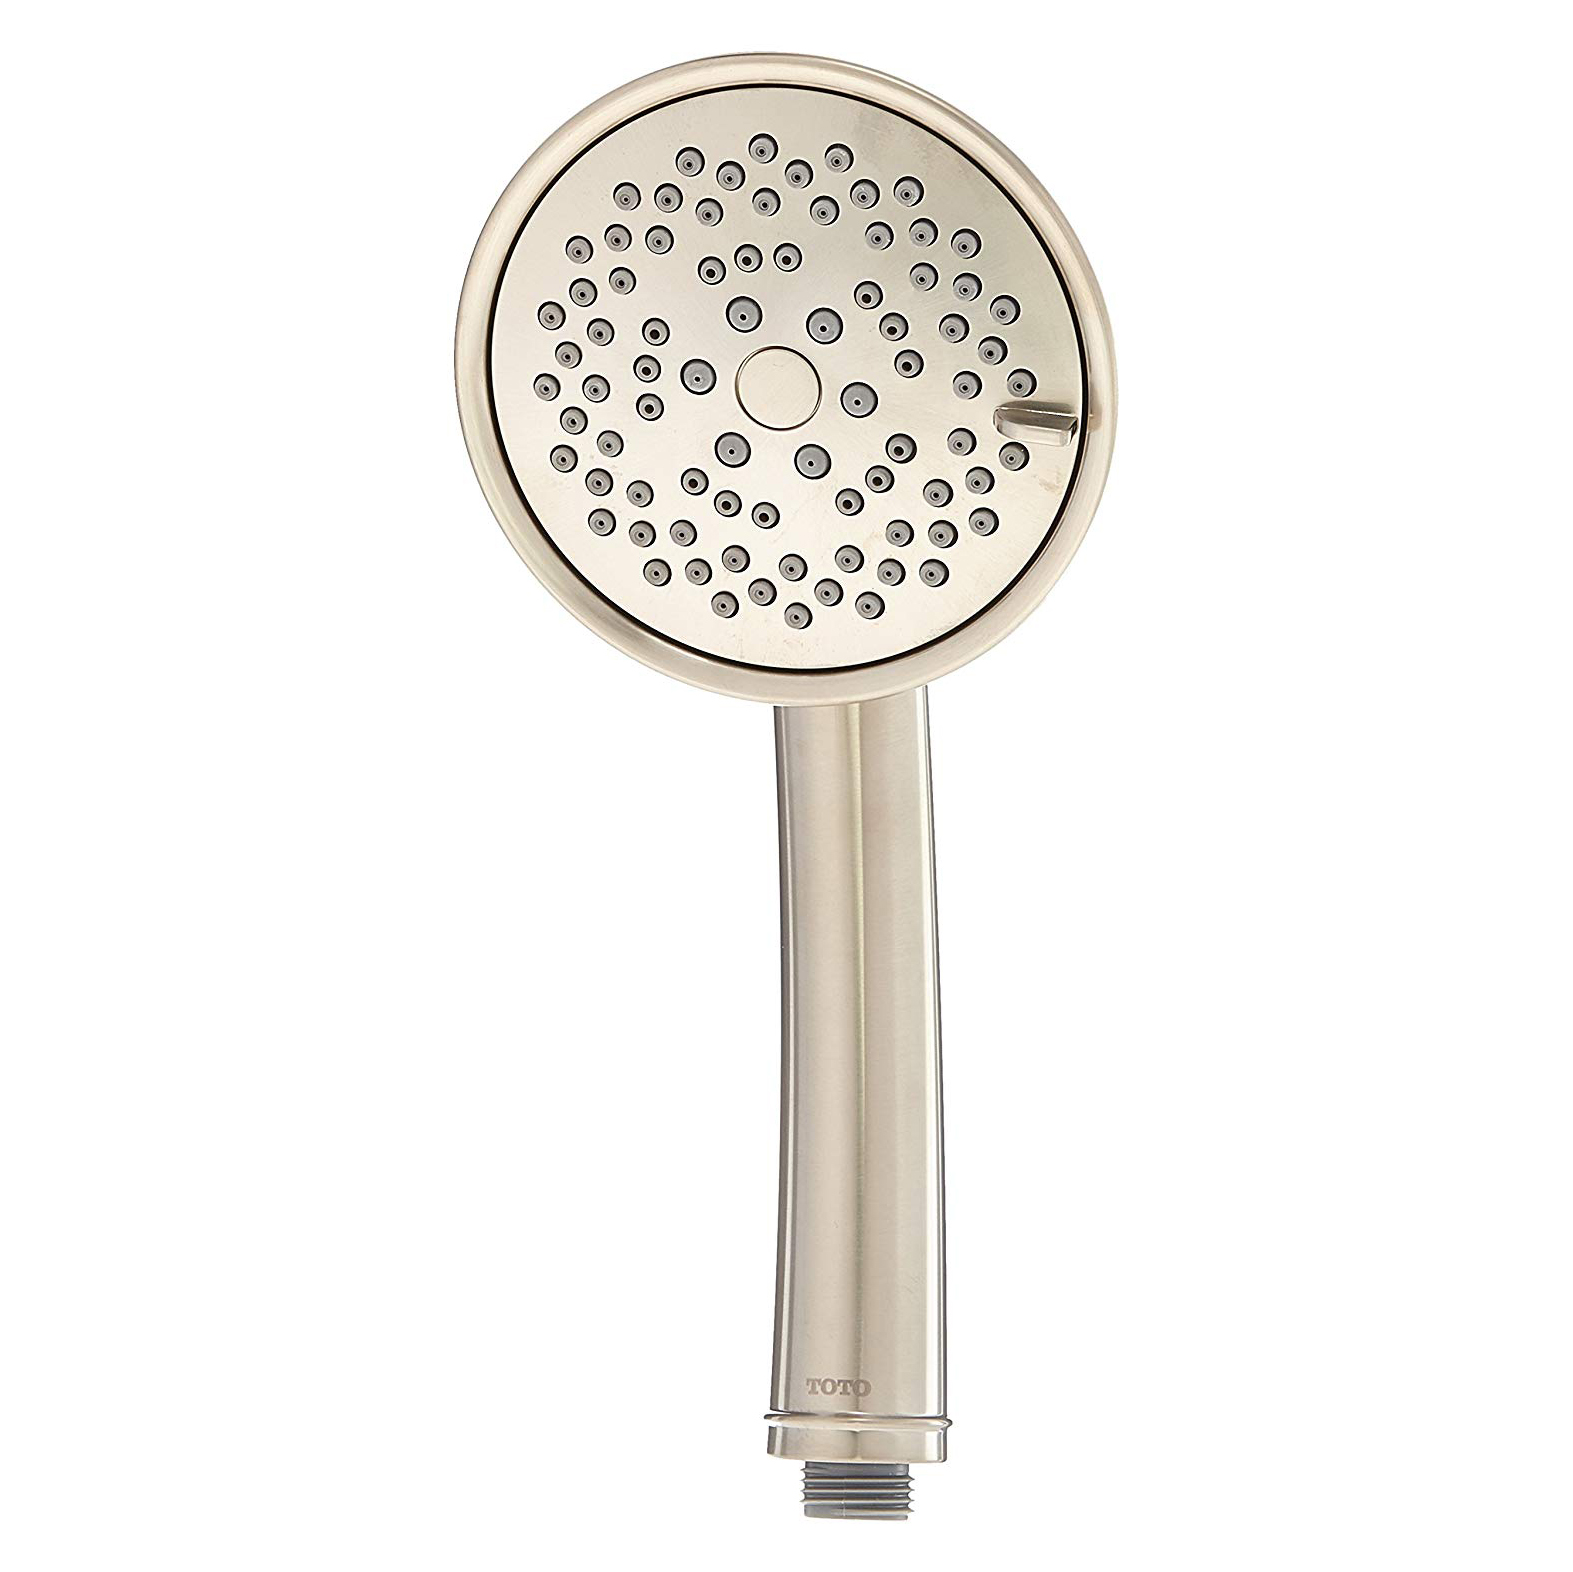 Transitional Series A Multi-Function Hand Shower In Brushed Nickel